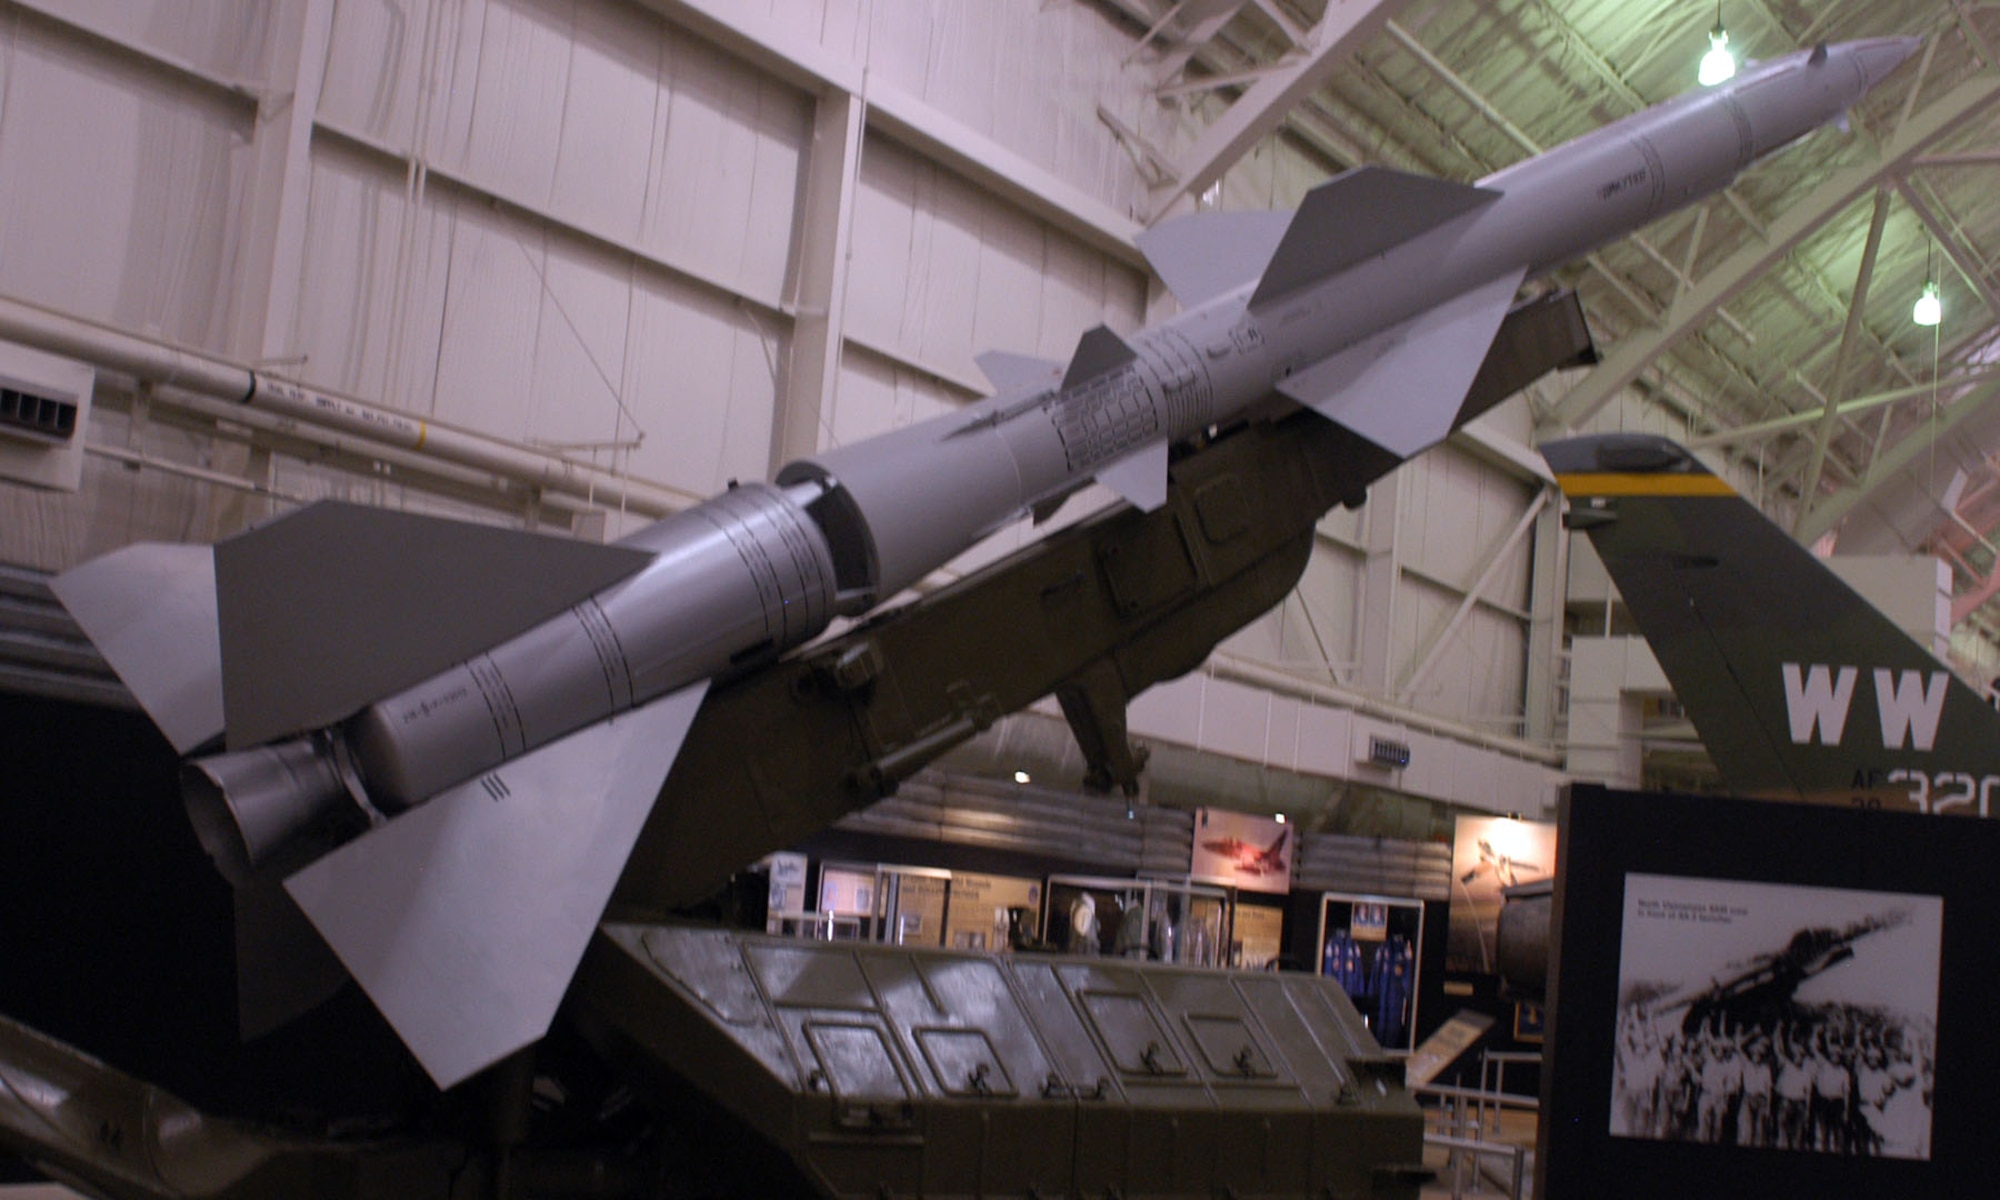 DAYTON, Ohio -- SA-2 Surface-to-Air Missile on display in the Southeast Asia War Gallery at the National Museum of the United States Air Force. (U.S. Air Force photo)